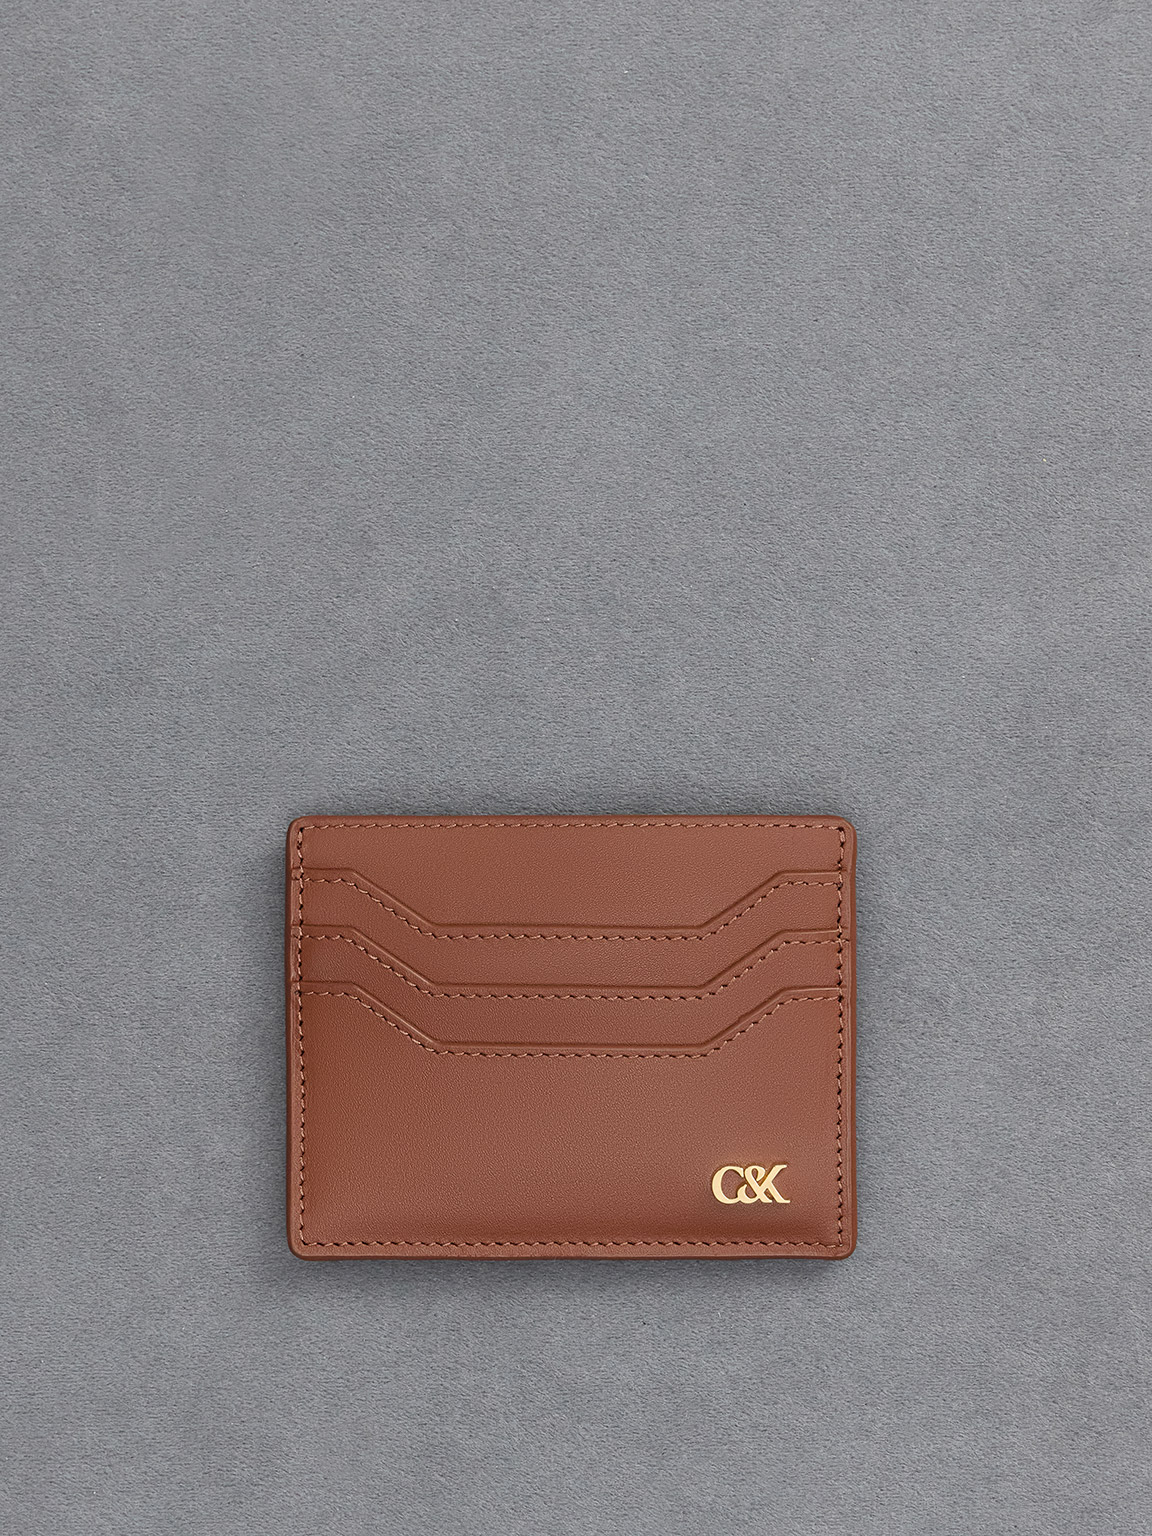 Charles & Keith Leather Multi-slot Card Holder In Cognac